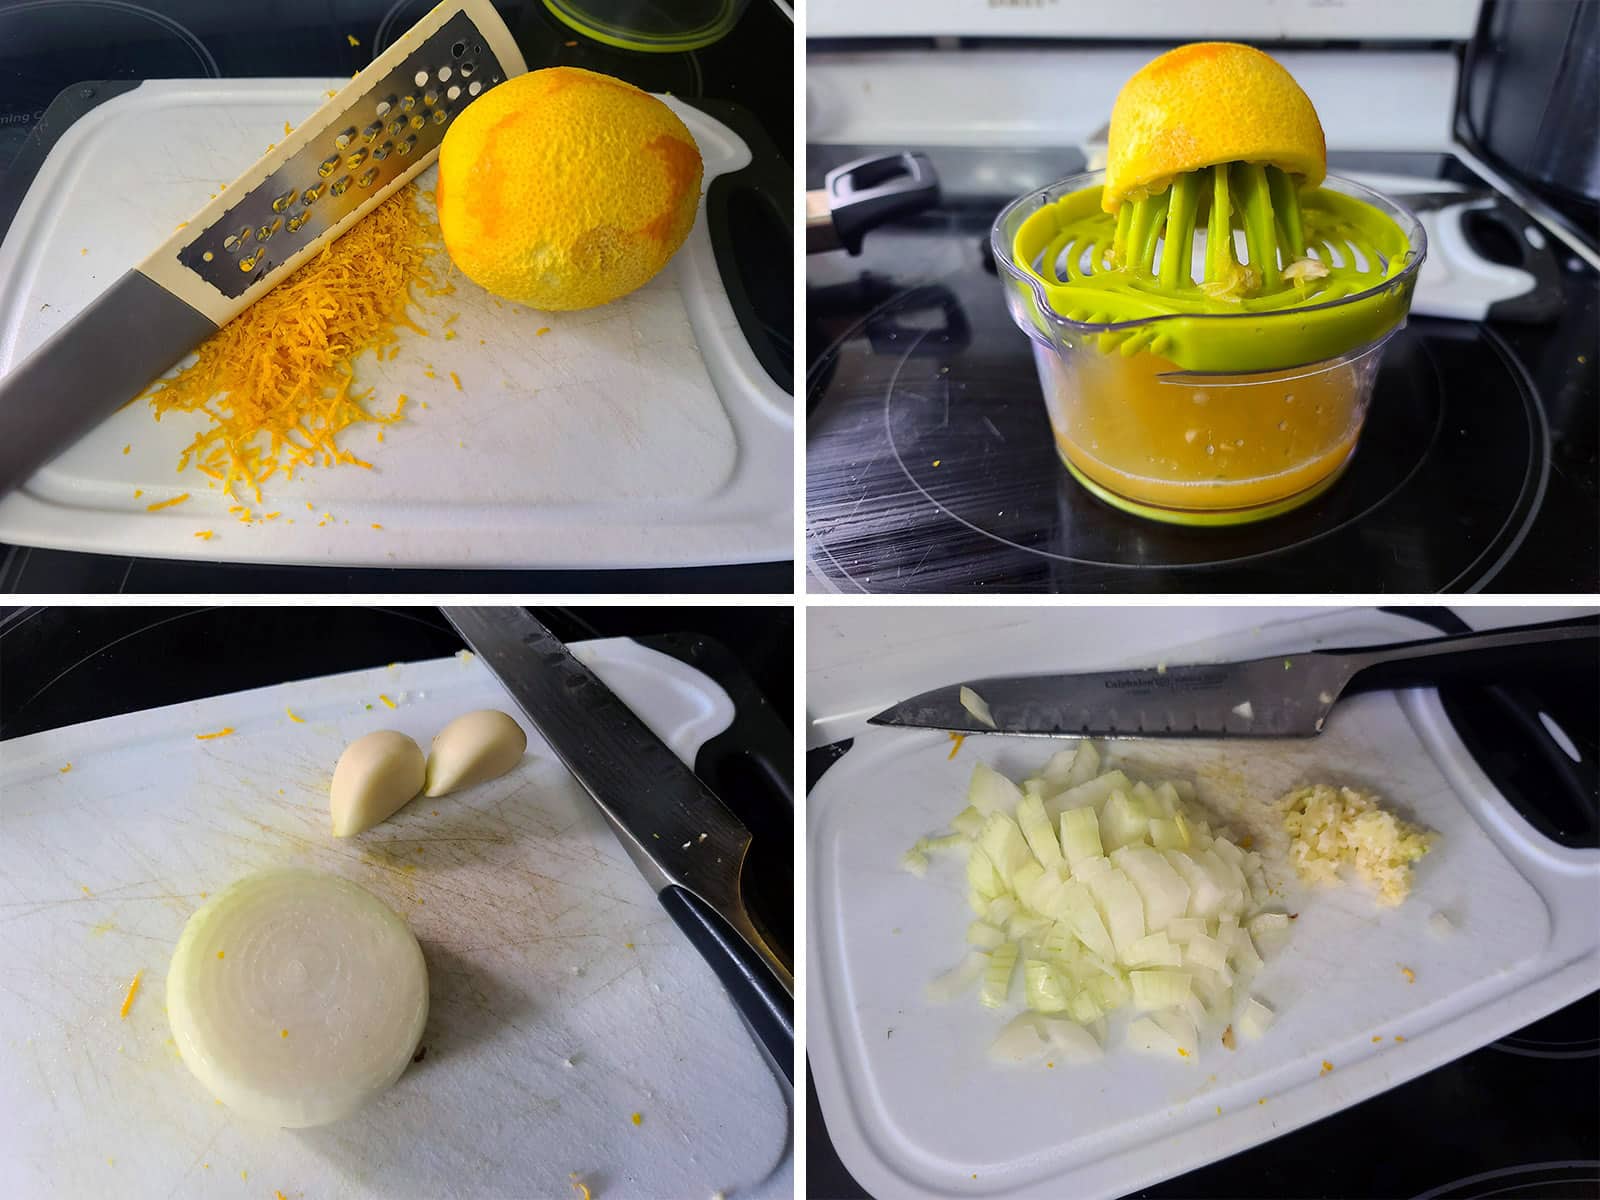 A 4 part image showing the orange being zested and juiced, and the onion being chopped.